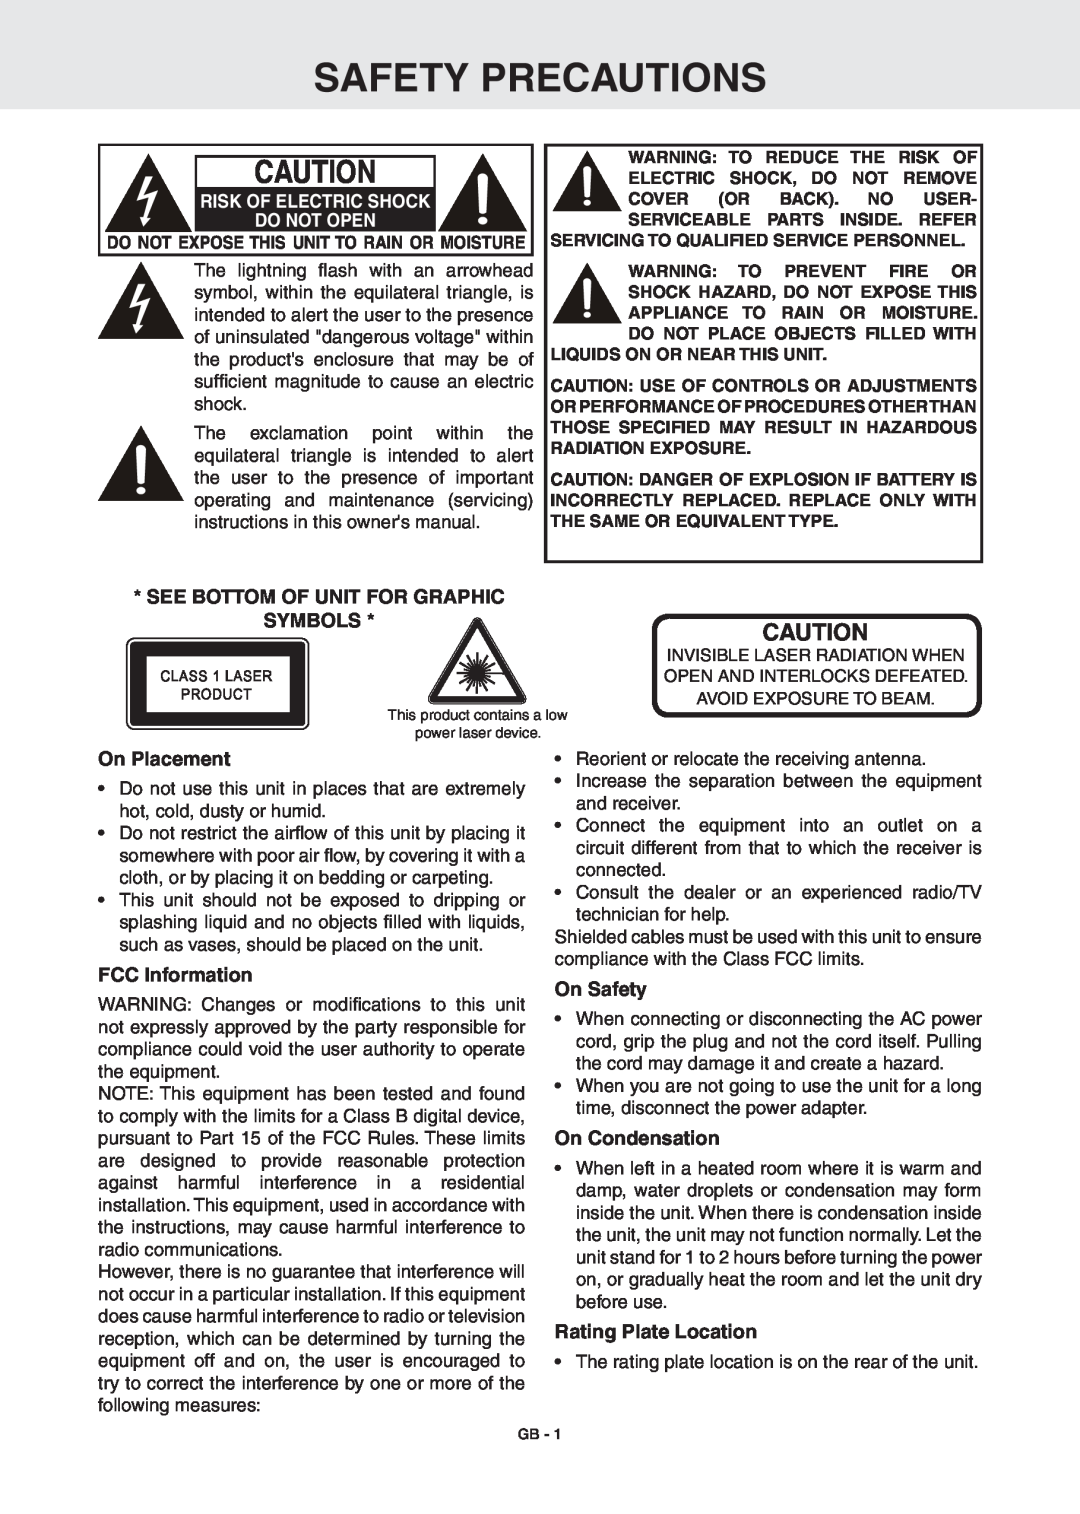 RCA DRC6389T Safety Precautions, See Bottom Of Unit For Graphic, Symbols, On Placement, FCC Information, On Safety 